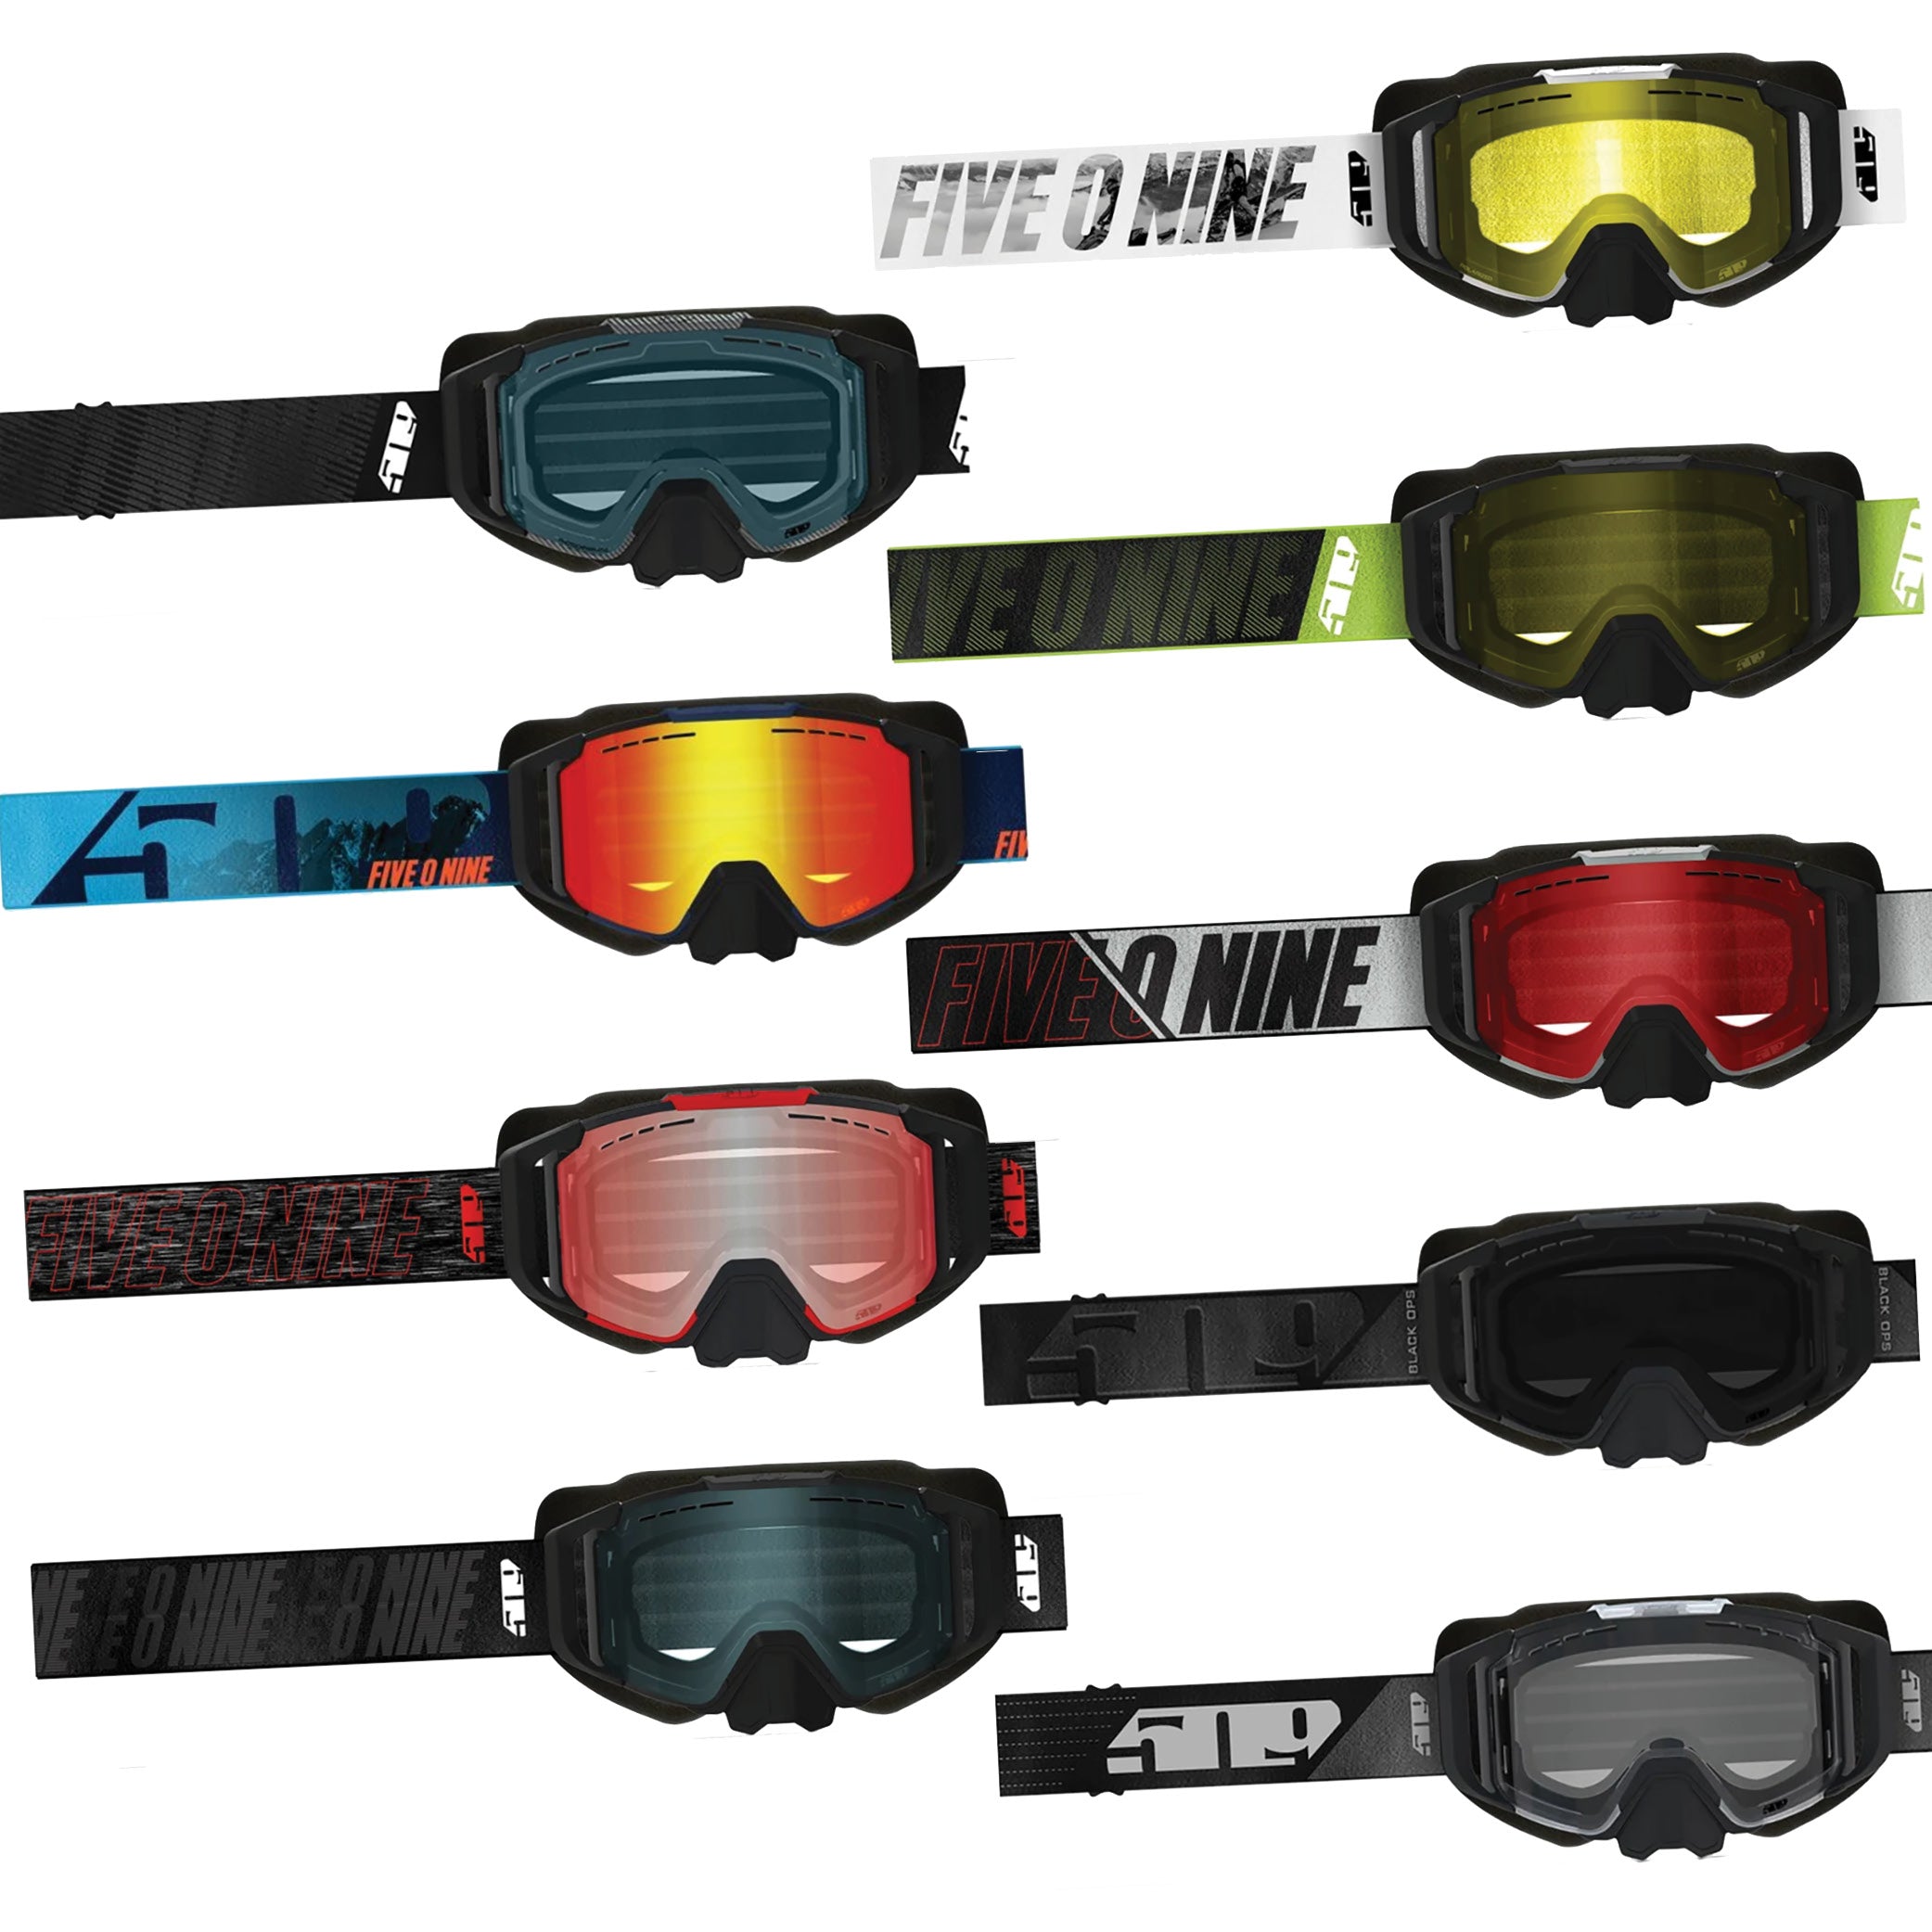 509 Sinister XL6 Goggle